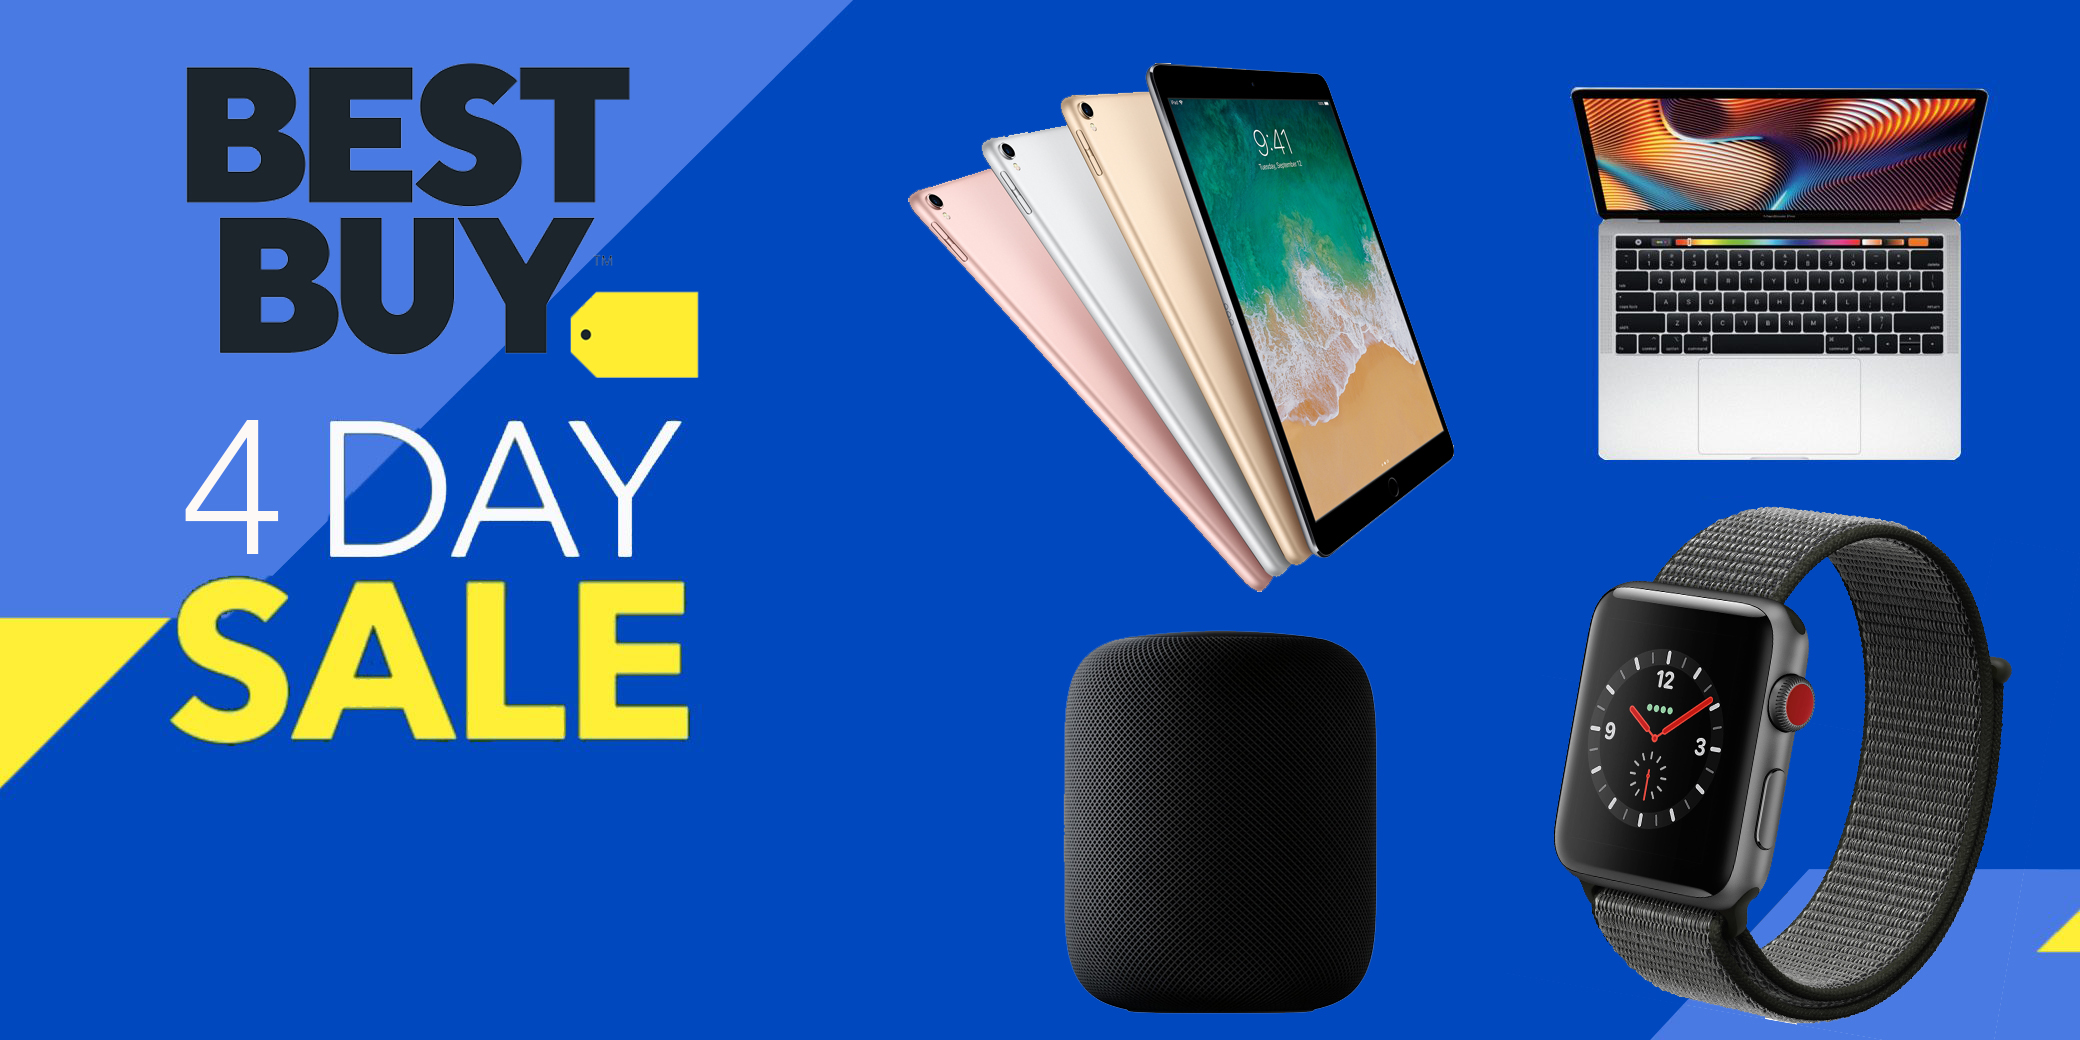 Best Buy Labor Day Sale 175 off iPad Pro, MacBook Pro from 1,000